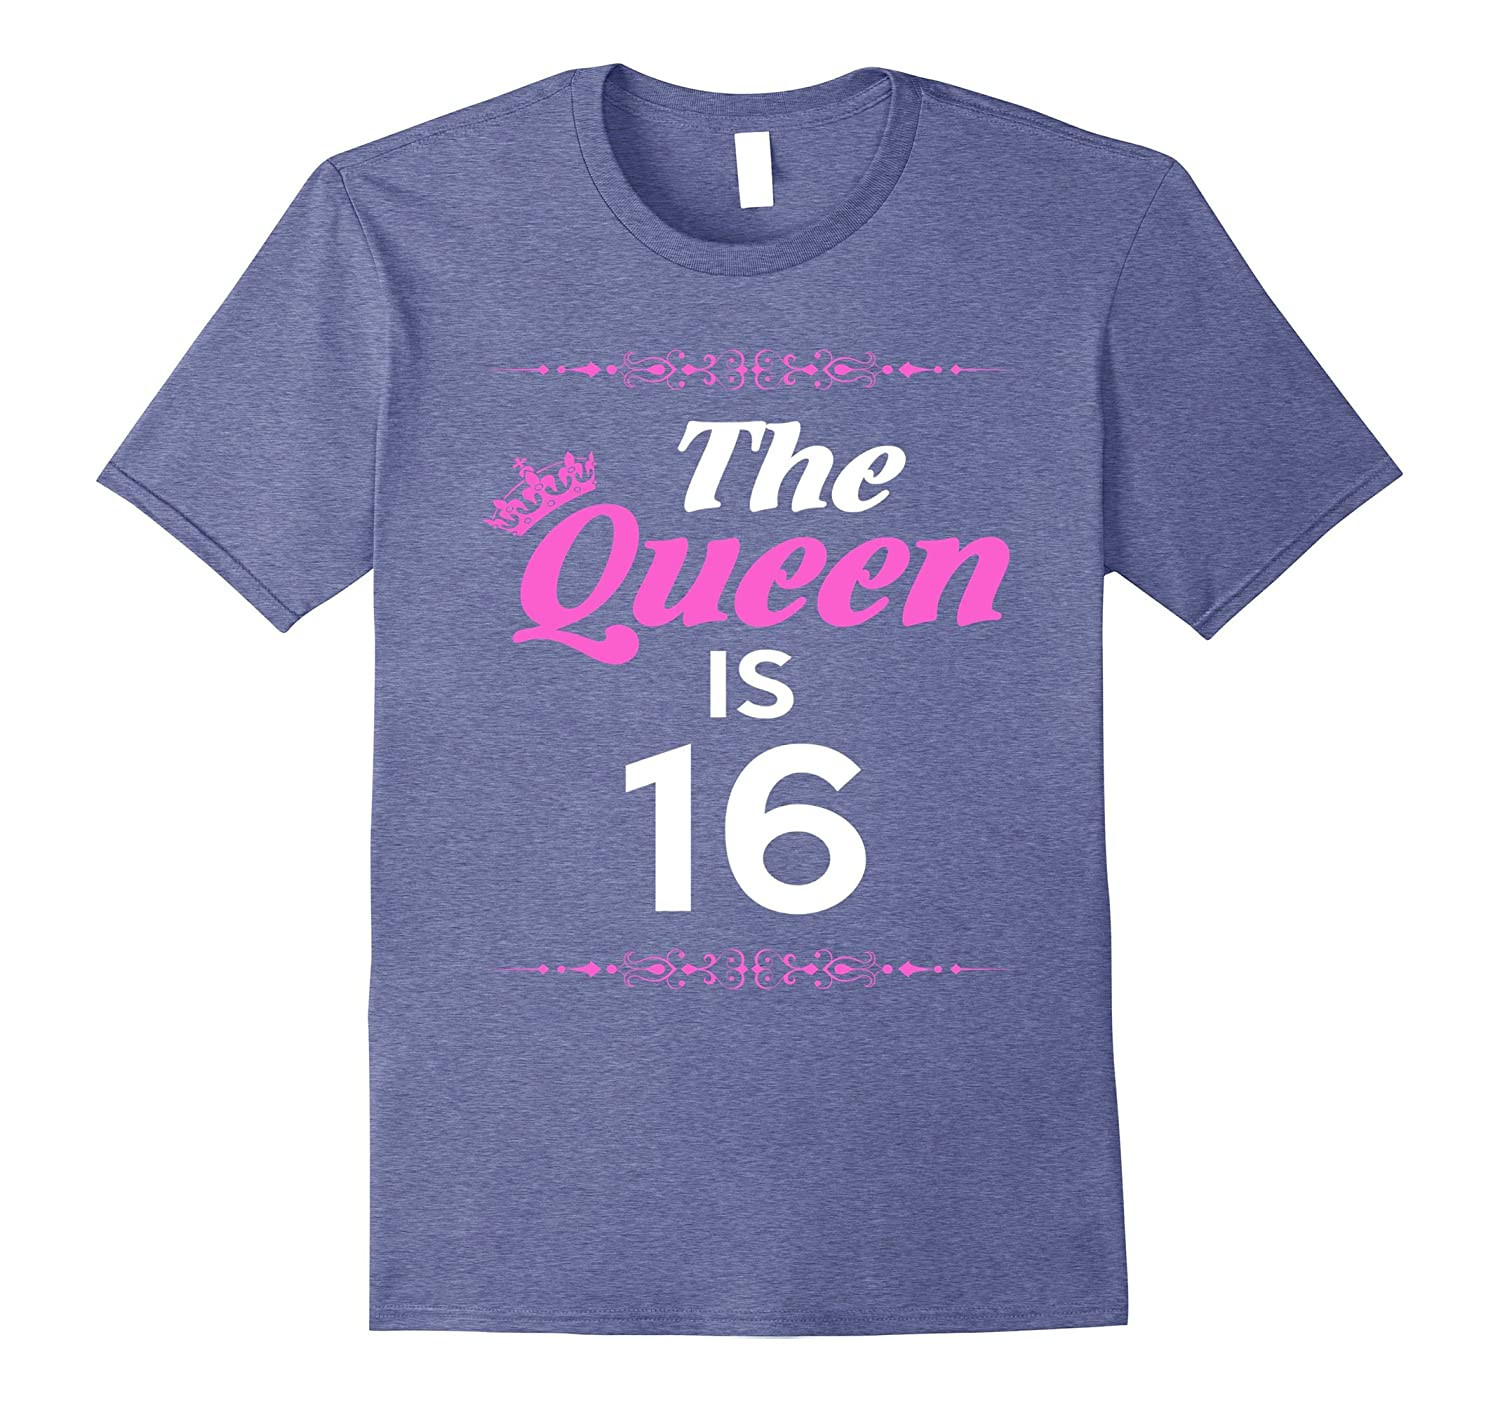 16Th Birthday Gift Ideas For Girl
 Queen is 16 Year Old 16th Birthday Gift Ideas for her